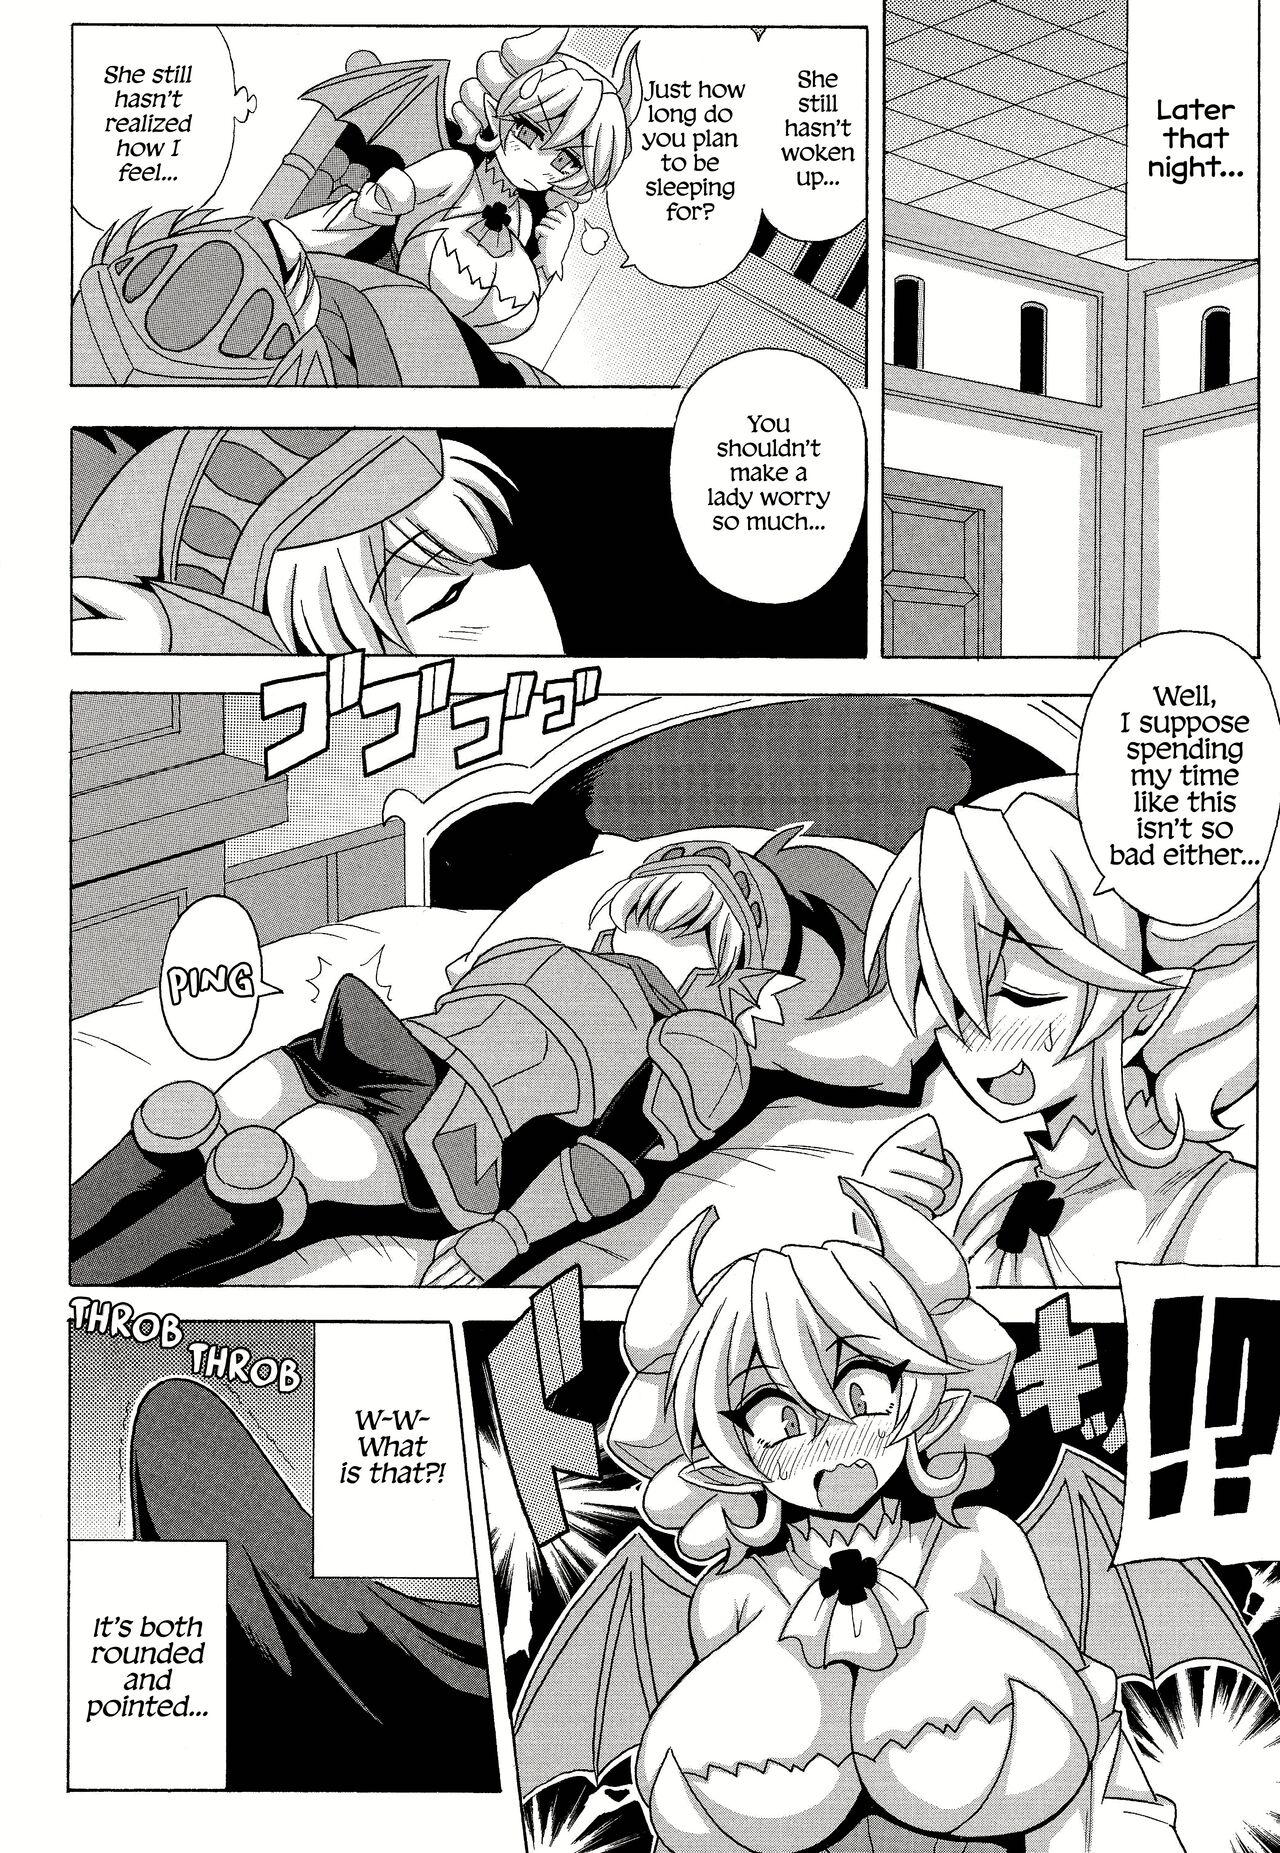 Con LABRYNTH MILK - Yu gi oh Face Fucking - Page 7